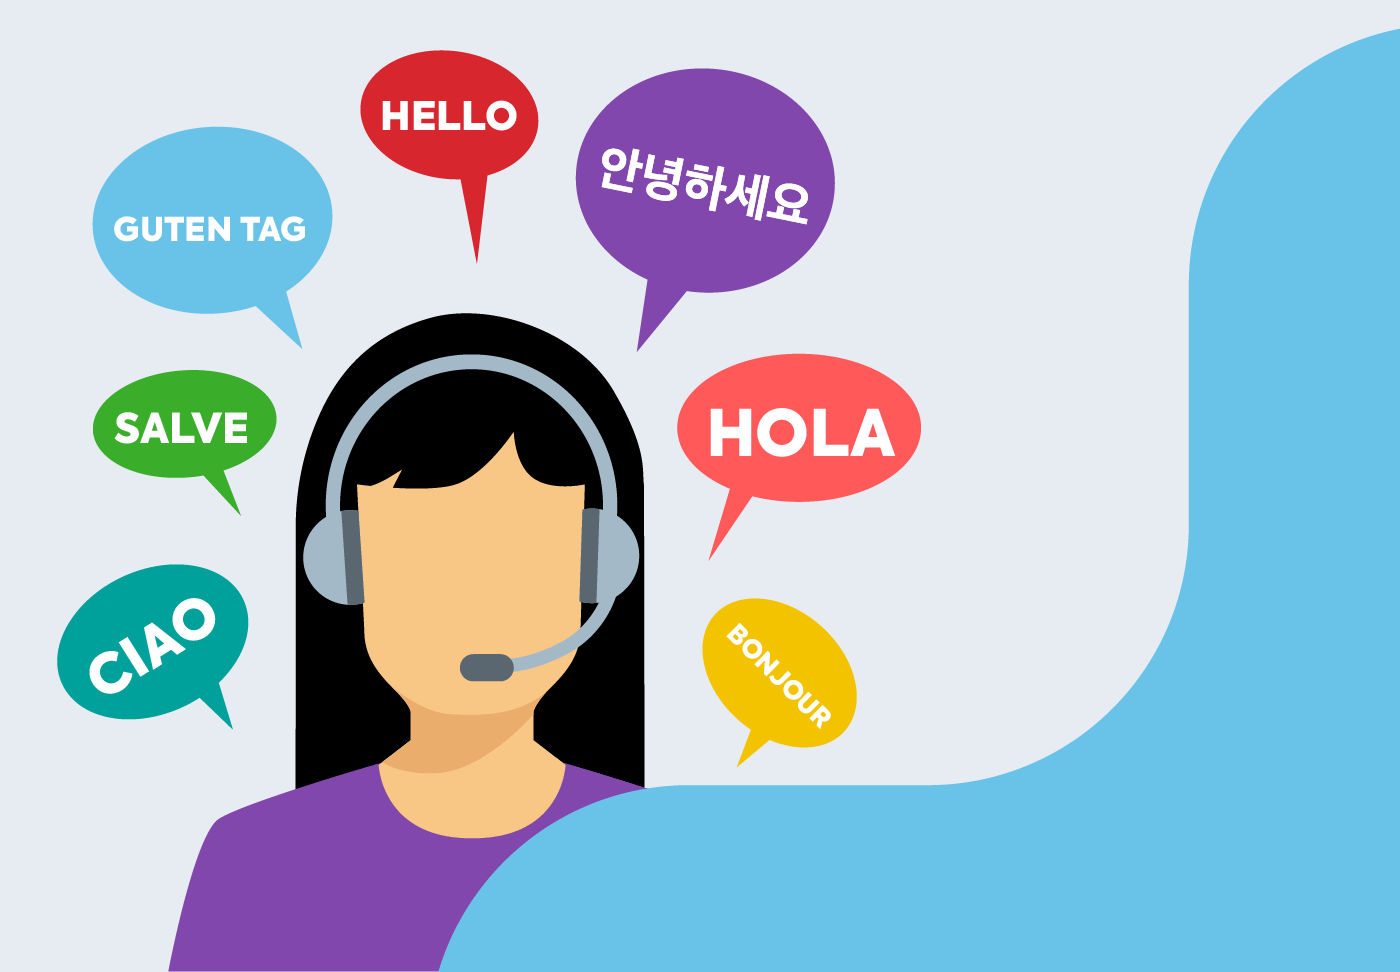 Illustration of a phone operator that speaks multiple languages.